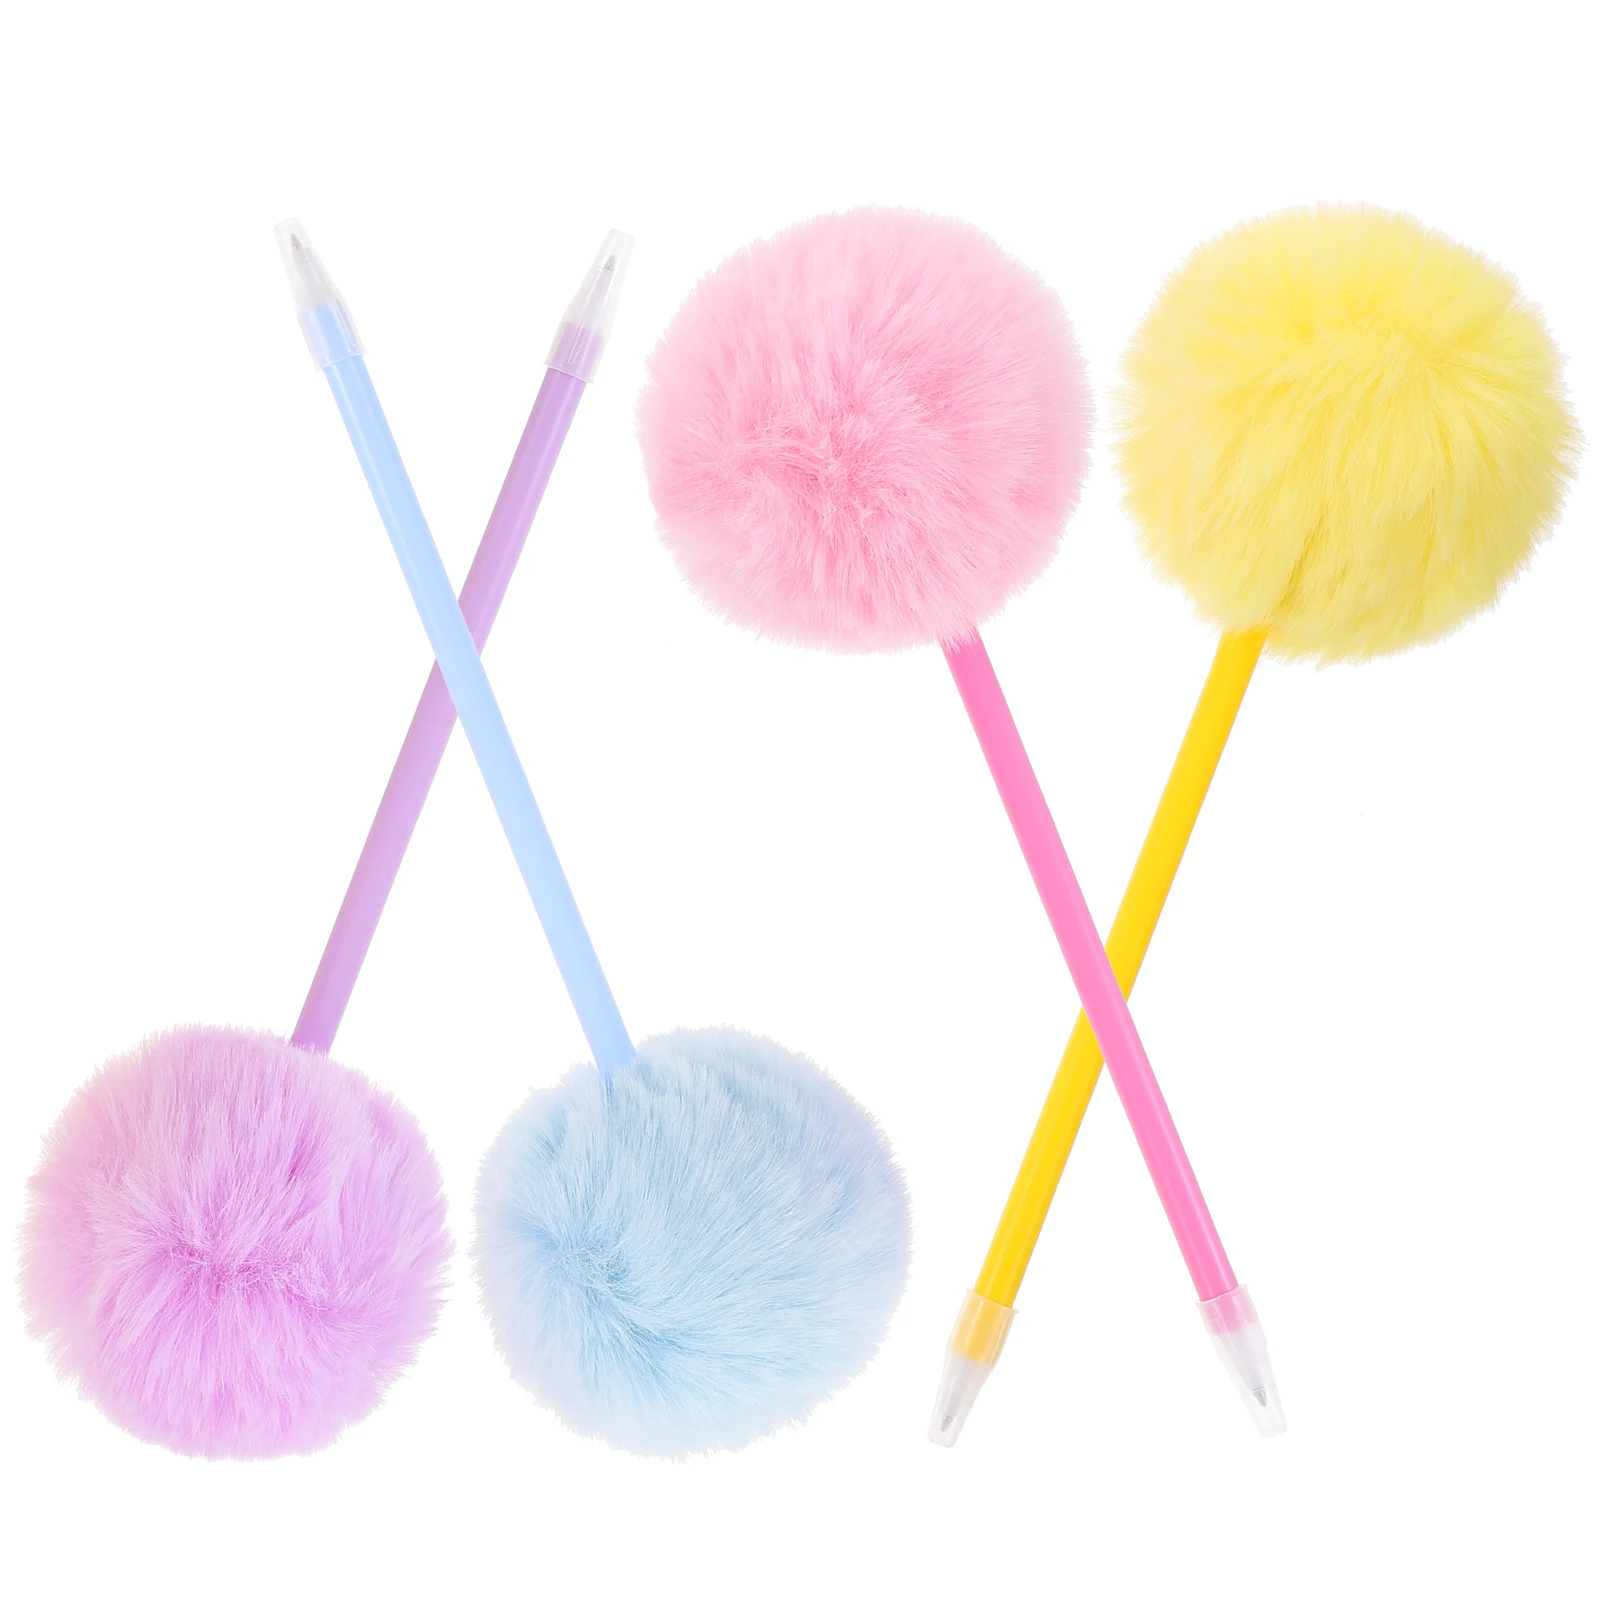 4 Pcs Hair Ball Writing Pen Ballpoint Pens Pompom Fluffy Cute Lovely for Cartoon Cute Pp Decorative Student Girls chinese calligraphy brushes pen chinese ink watercolor oil painting landscape weasel hair hook line pen regular script writing